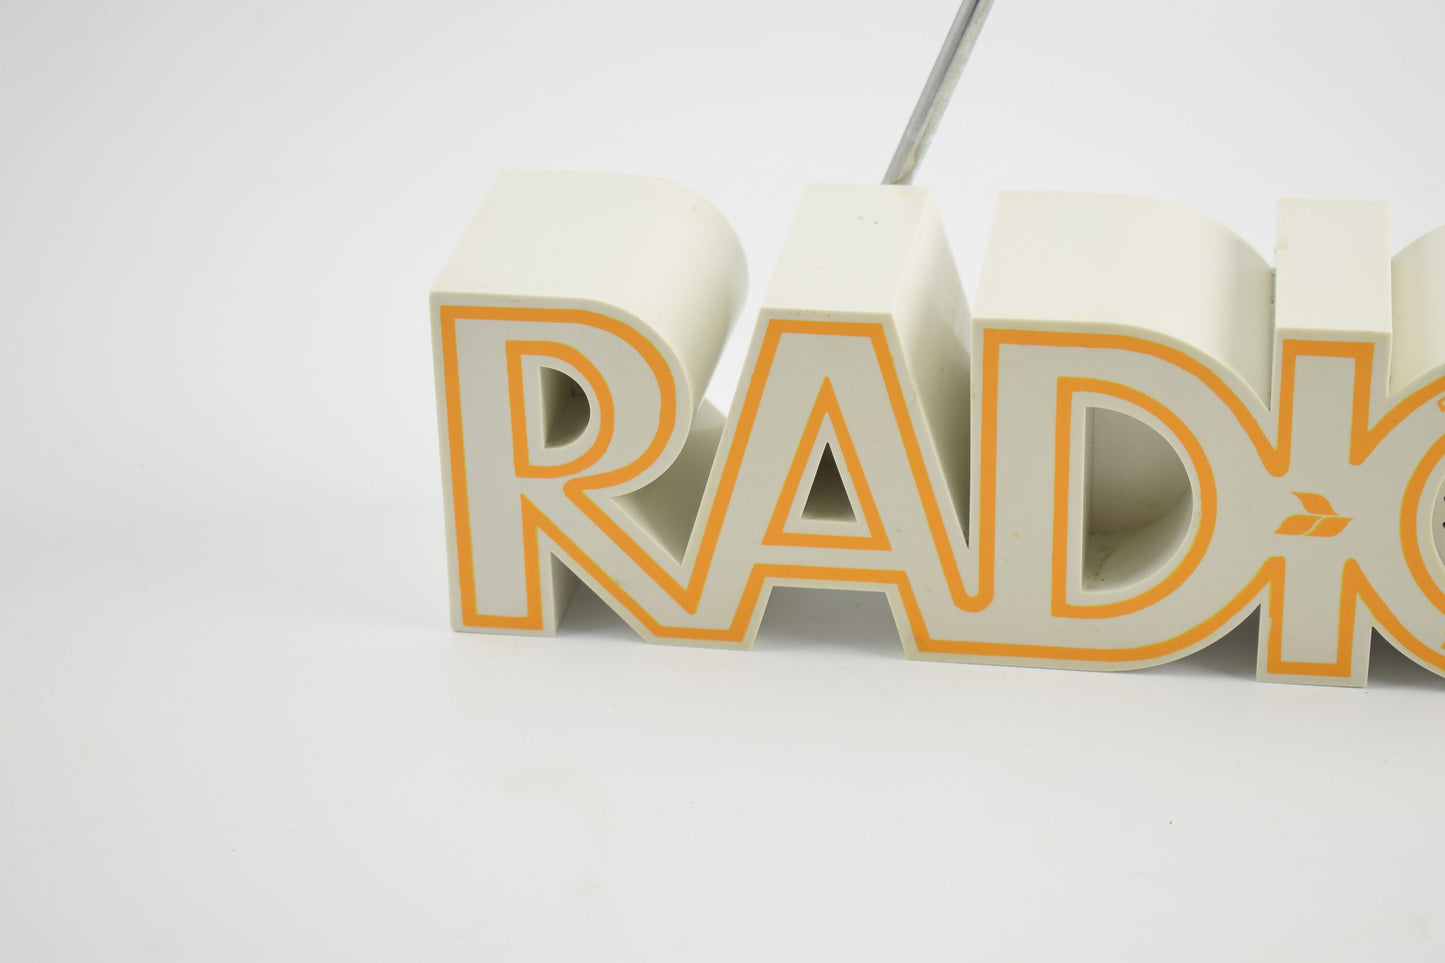 Radio radio Model: 20-1 from Isis Electronics; HK  in the form of the word radio.